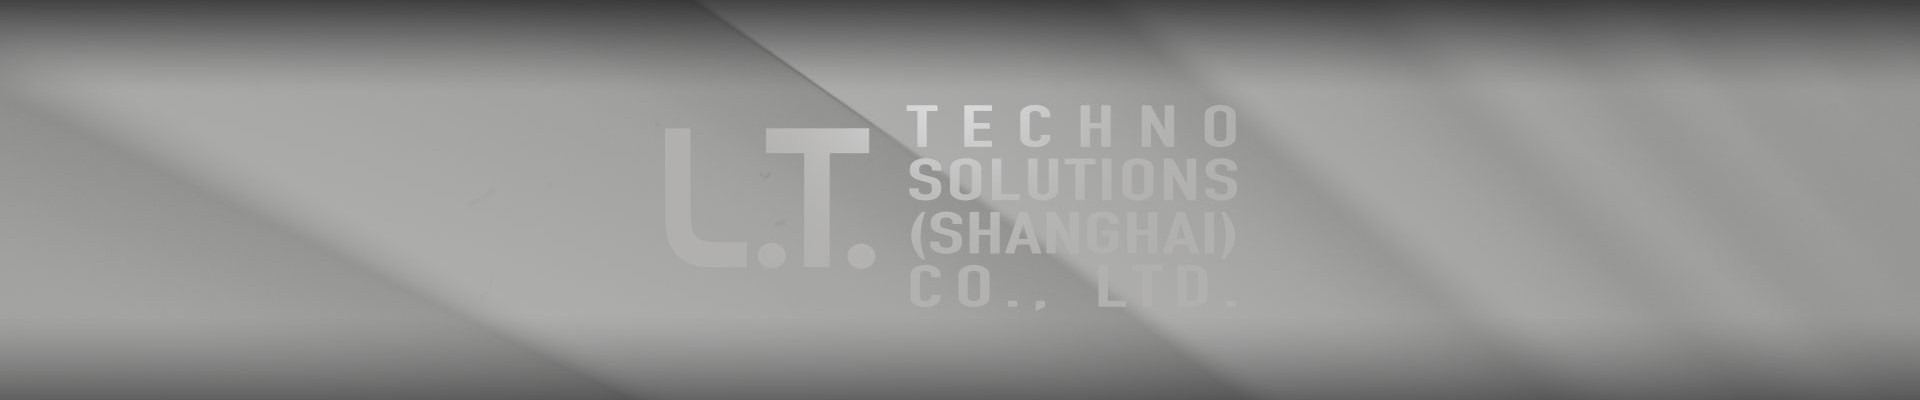 Privacy Policy - L.T. Techno Solutions  (Shanghai) Co., Ltd. - packaging company